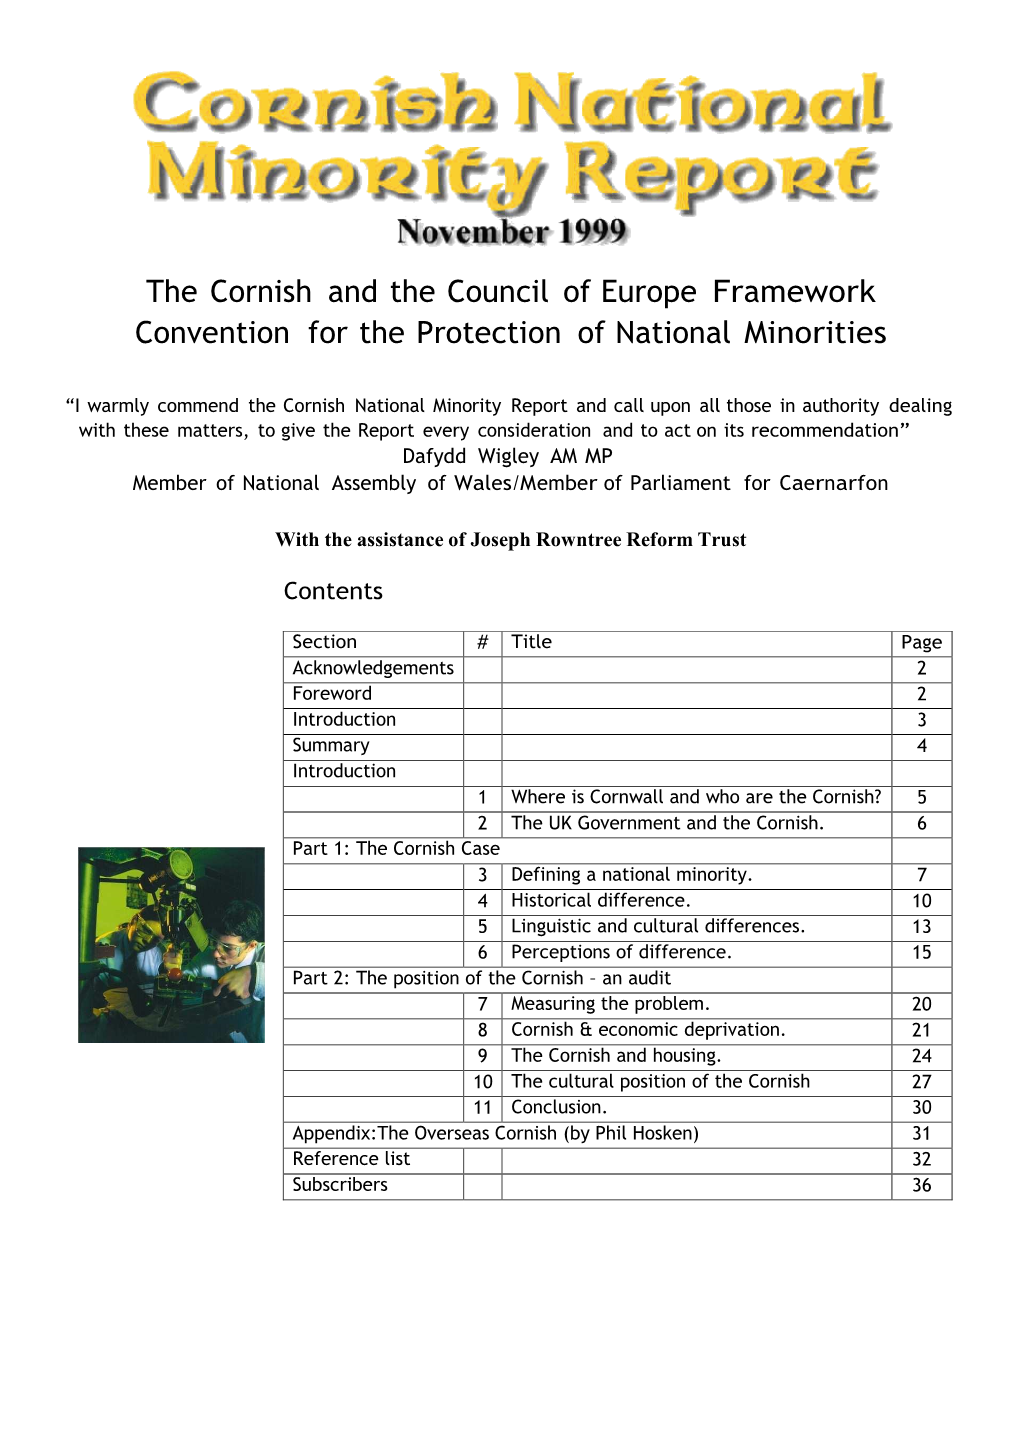 The Cornish and the Council of Europe Framework Convention for the Protection of National Minorities